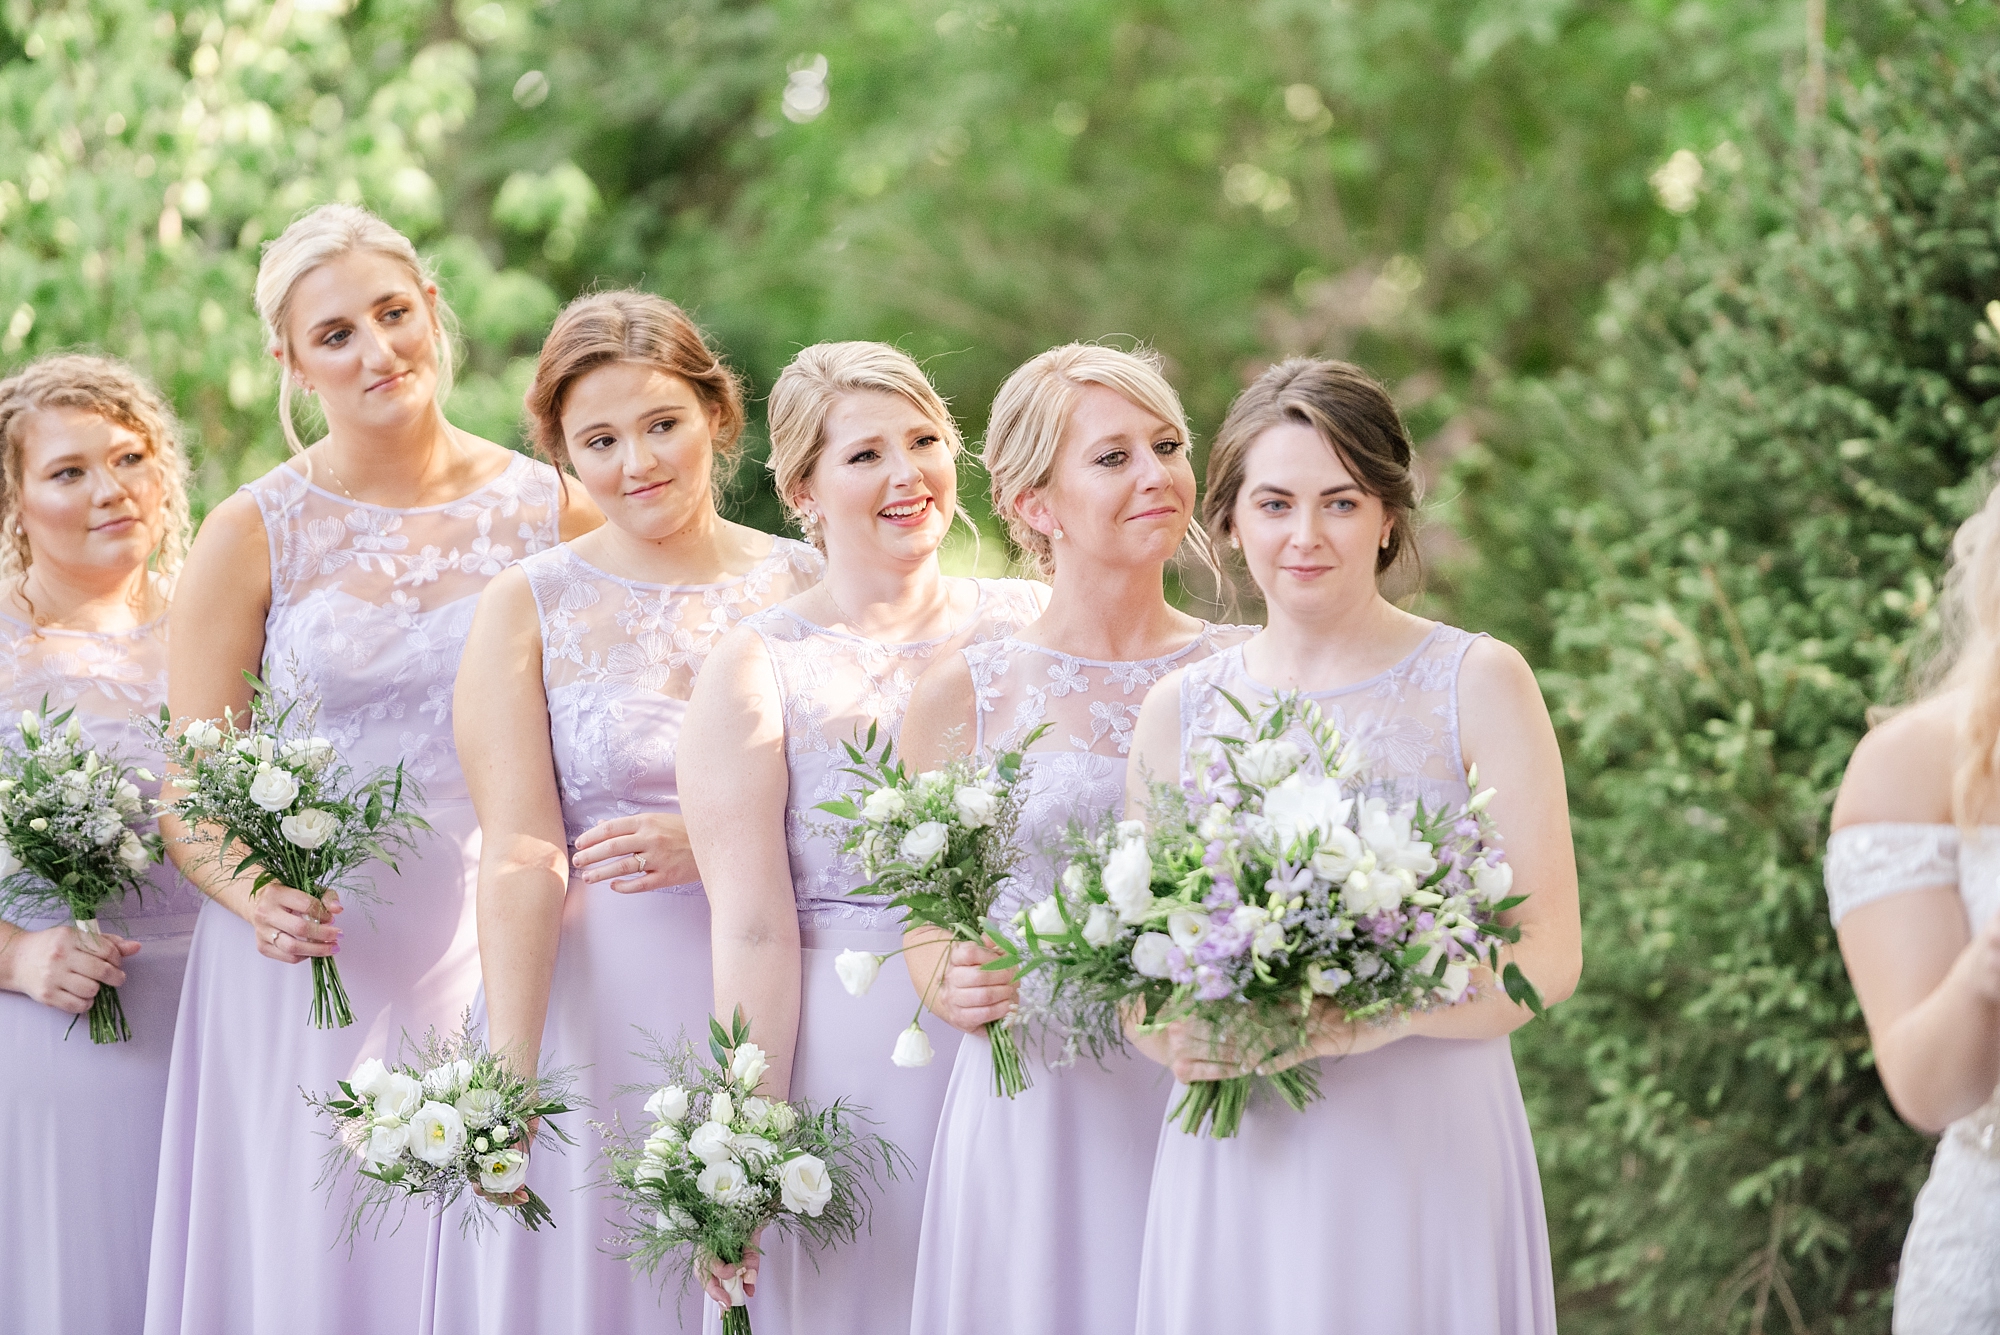 bridesmaids in purple gowns watch bride and groom exchange vows